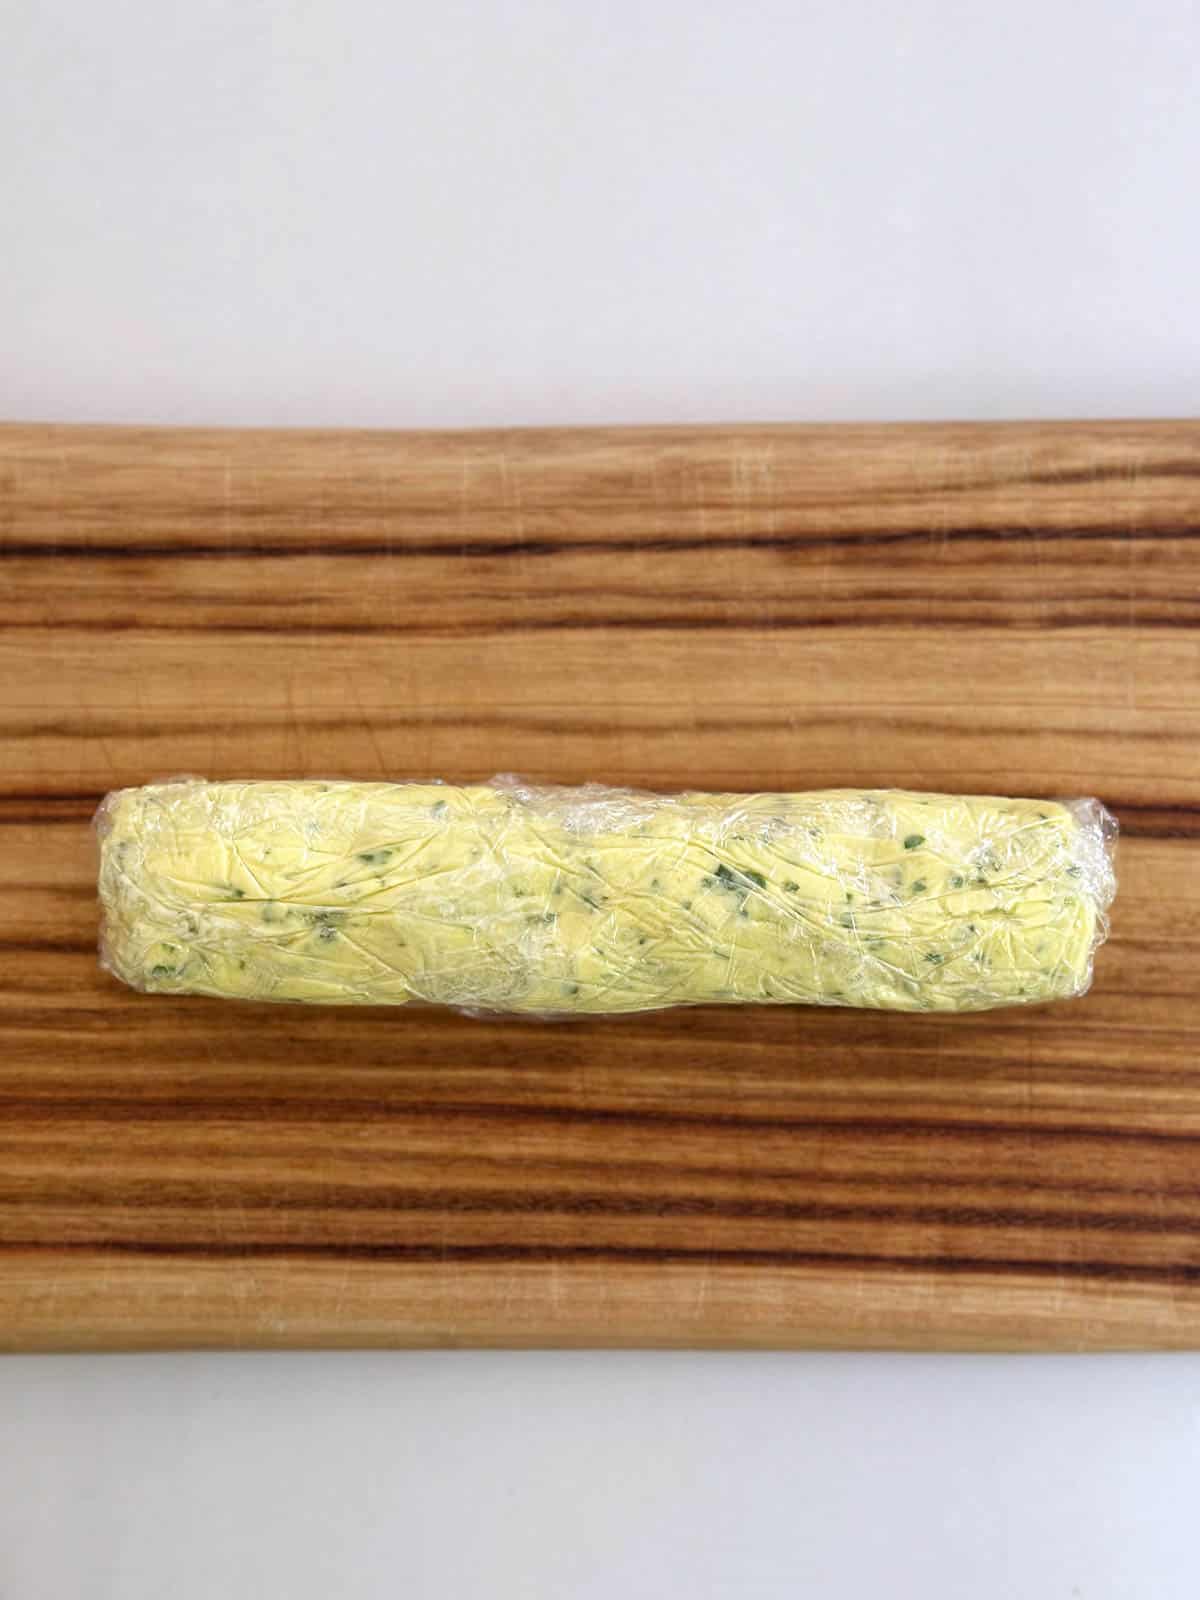 Garlic butter rolled in cling film.